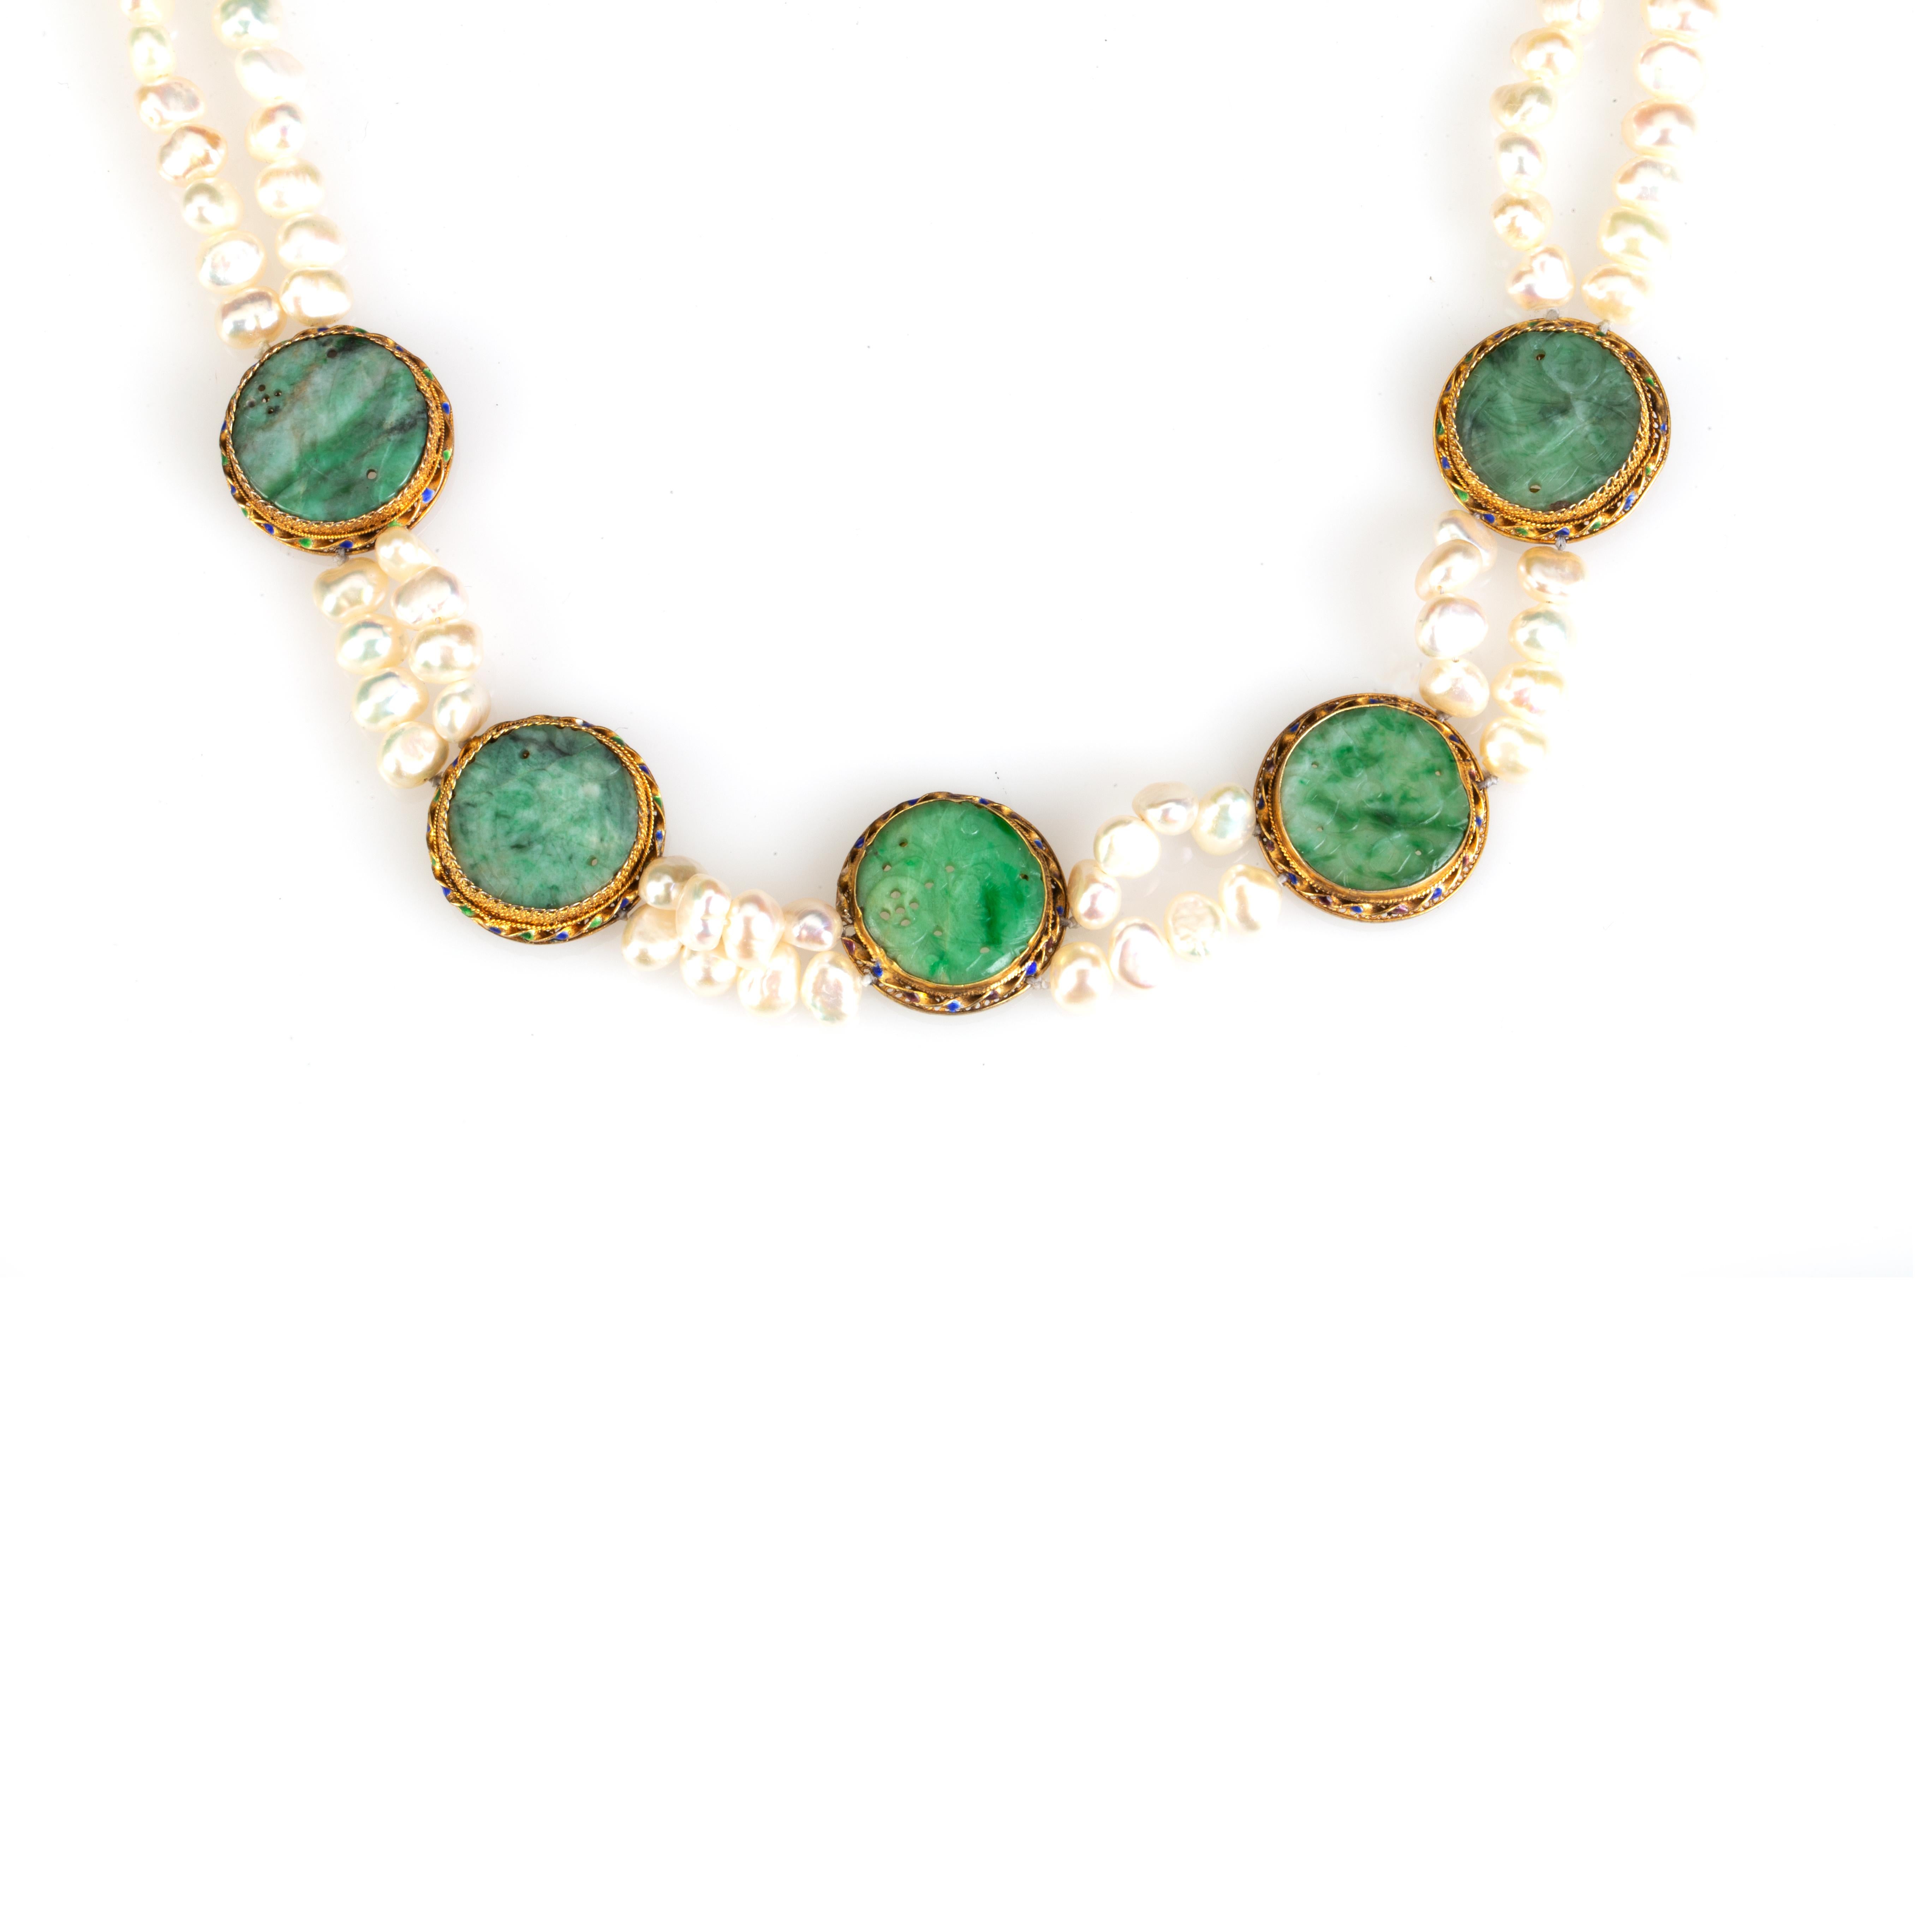 Artist Pearl and Jade Necklace